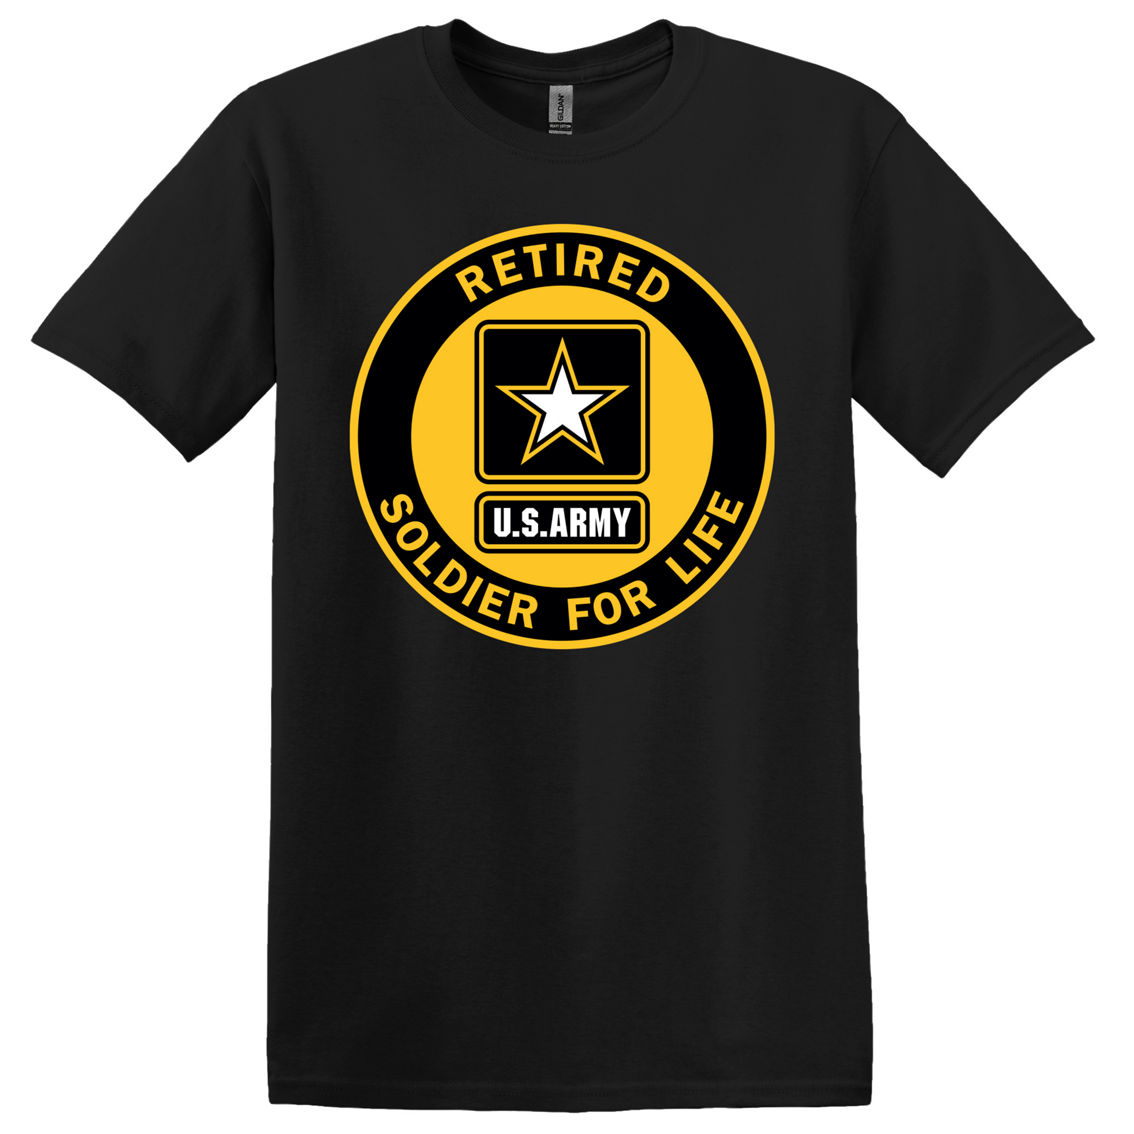 Eagle Crest Retired U.s. Army Soldier For Life Tee | Shirts | Clothing ...